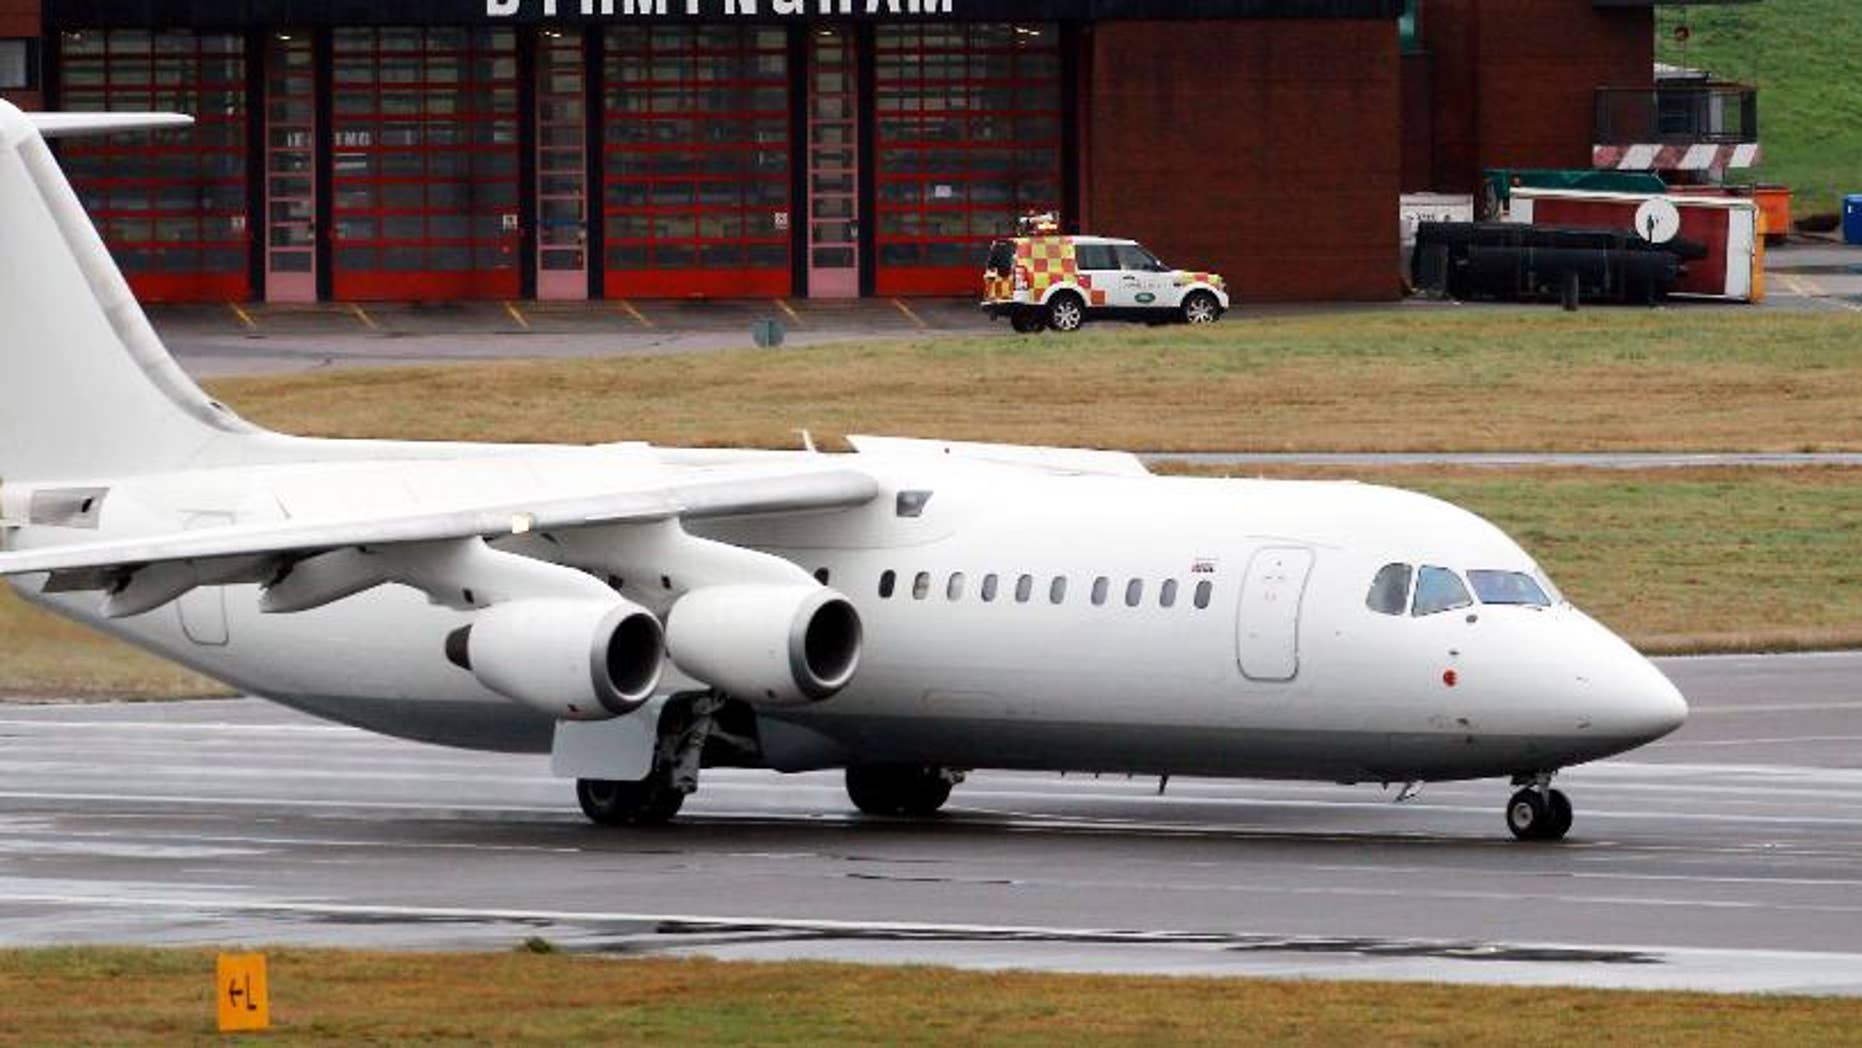 A look at the BAE 146, the plane that crashed carrying Brazlian soccer team